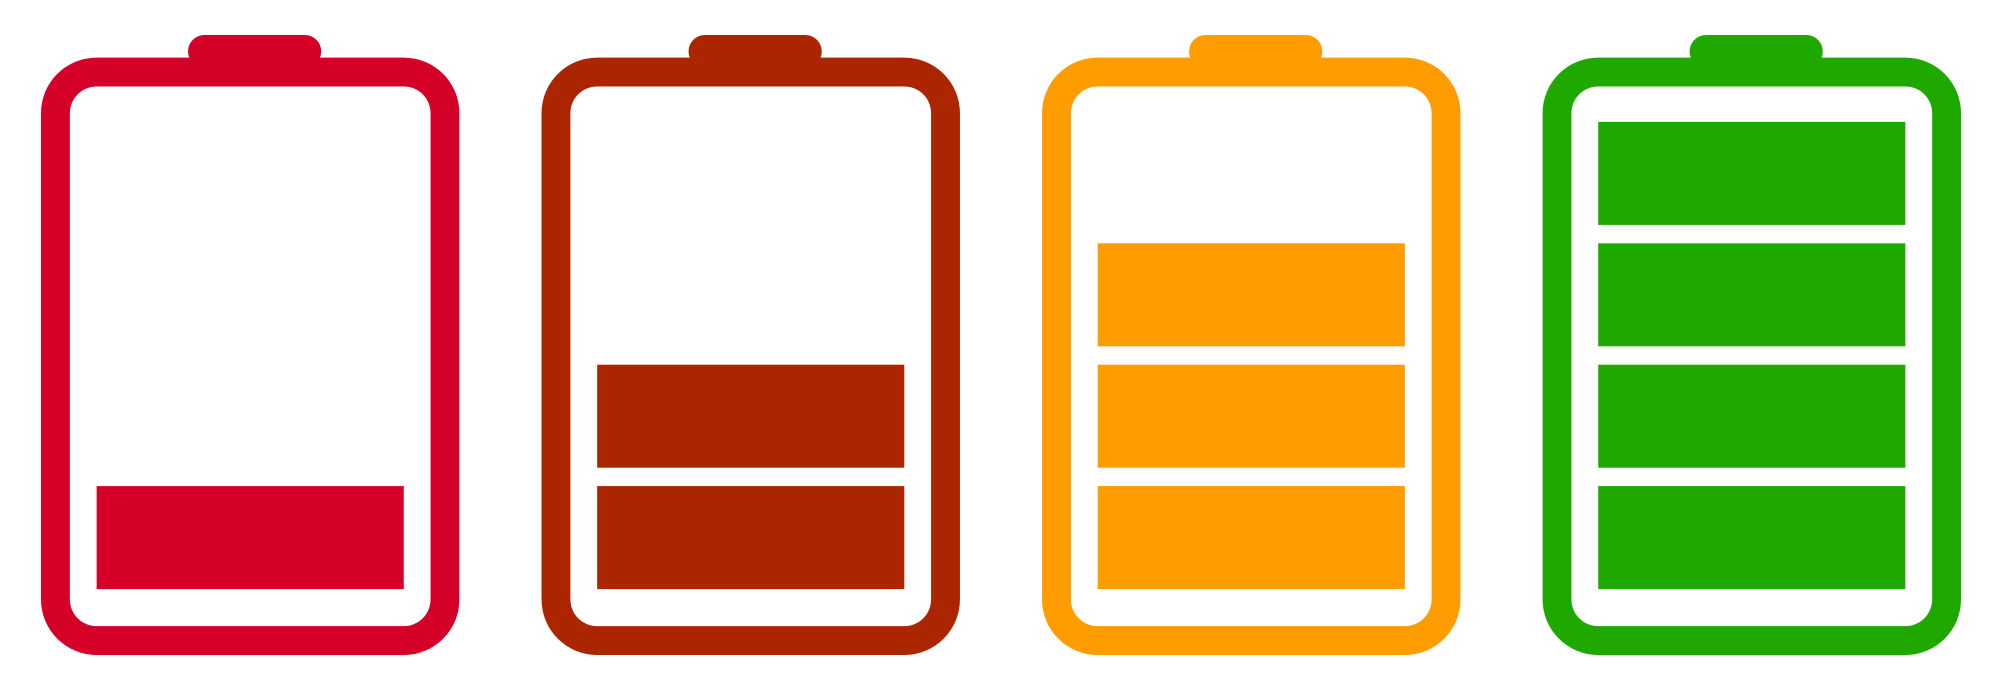 Charging Battery icons